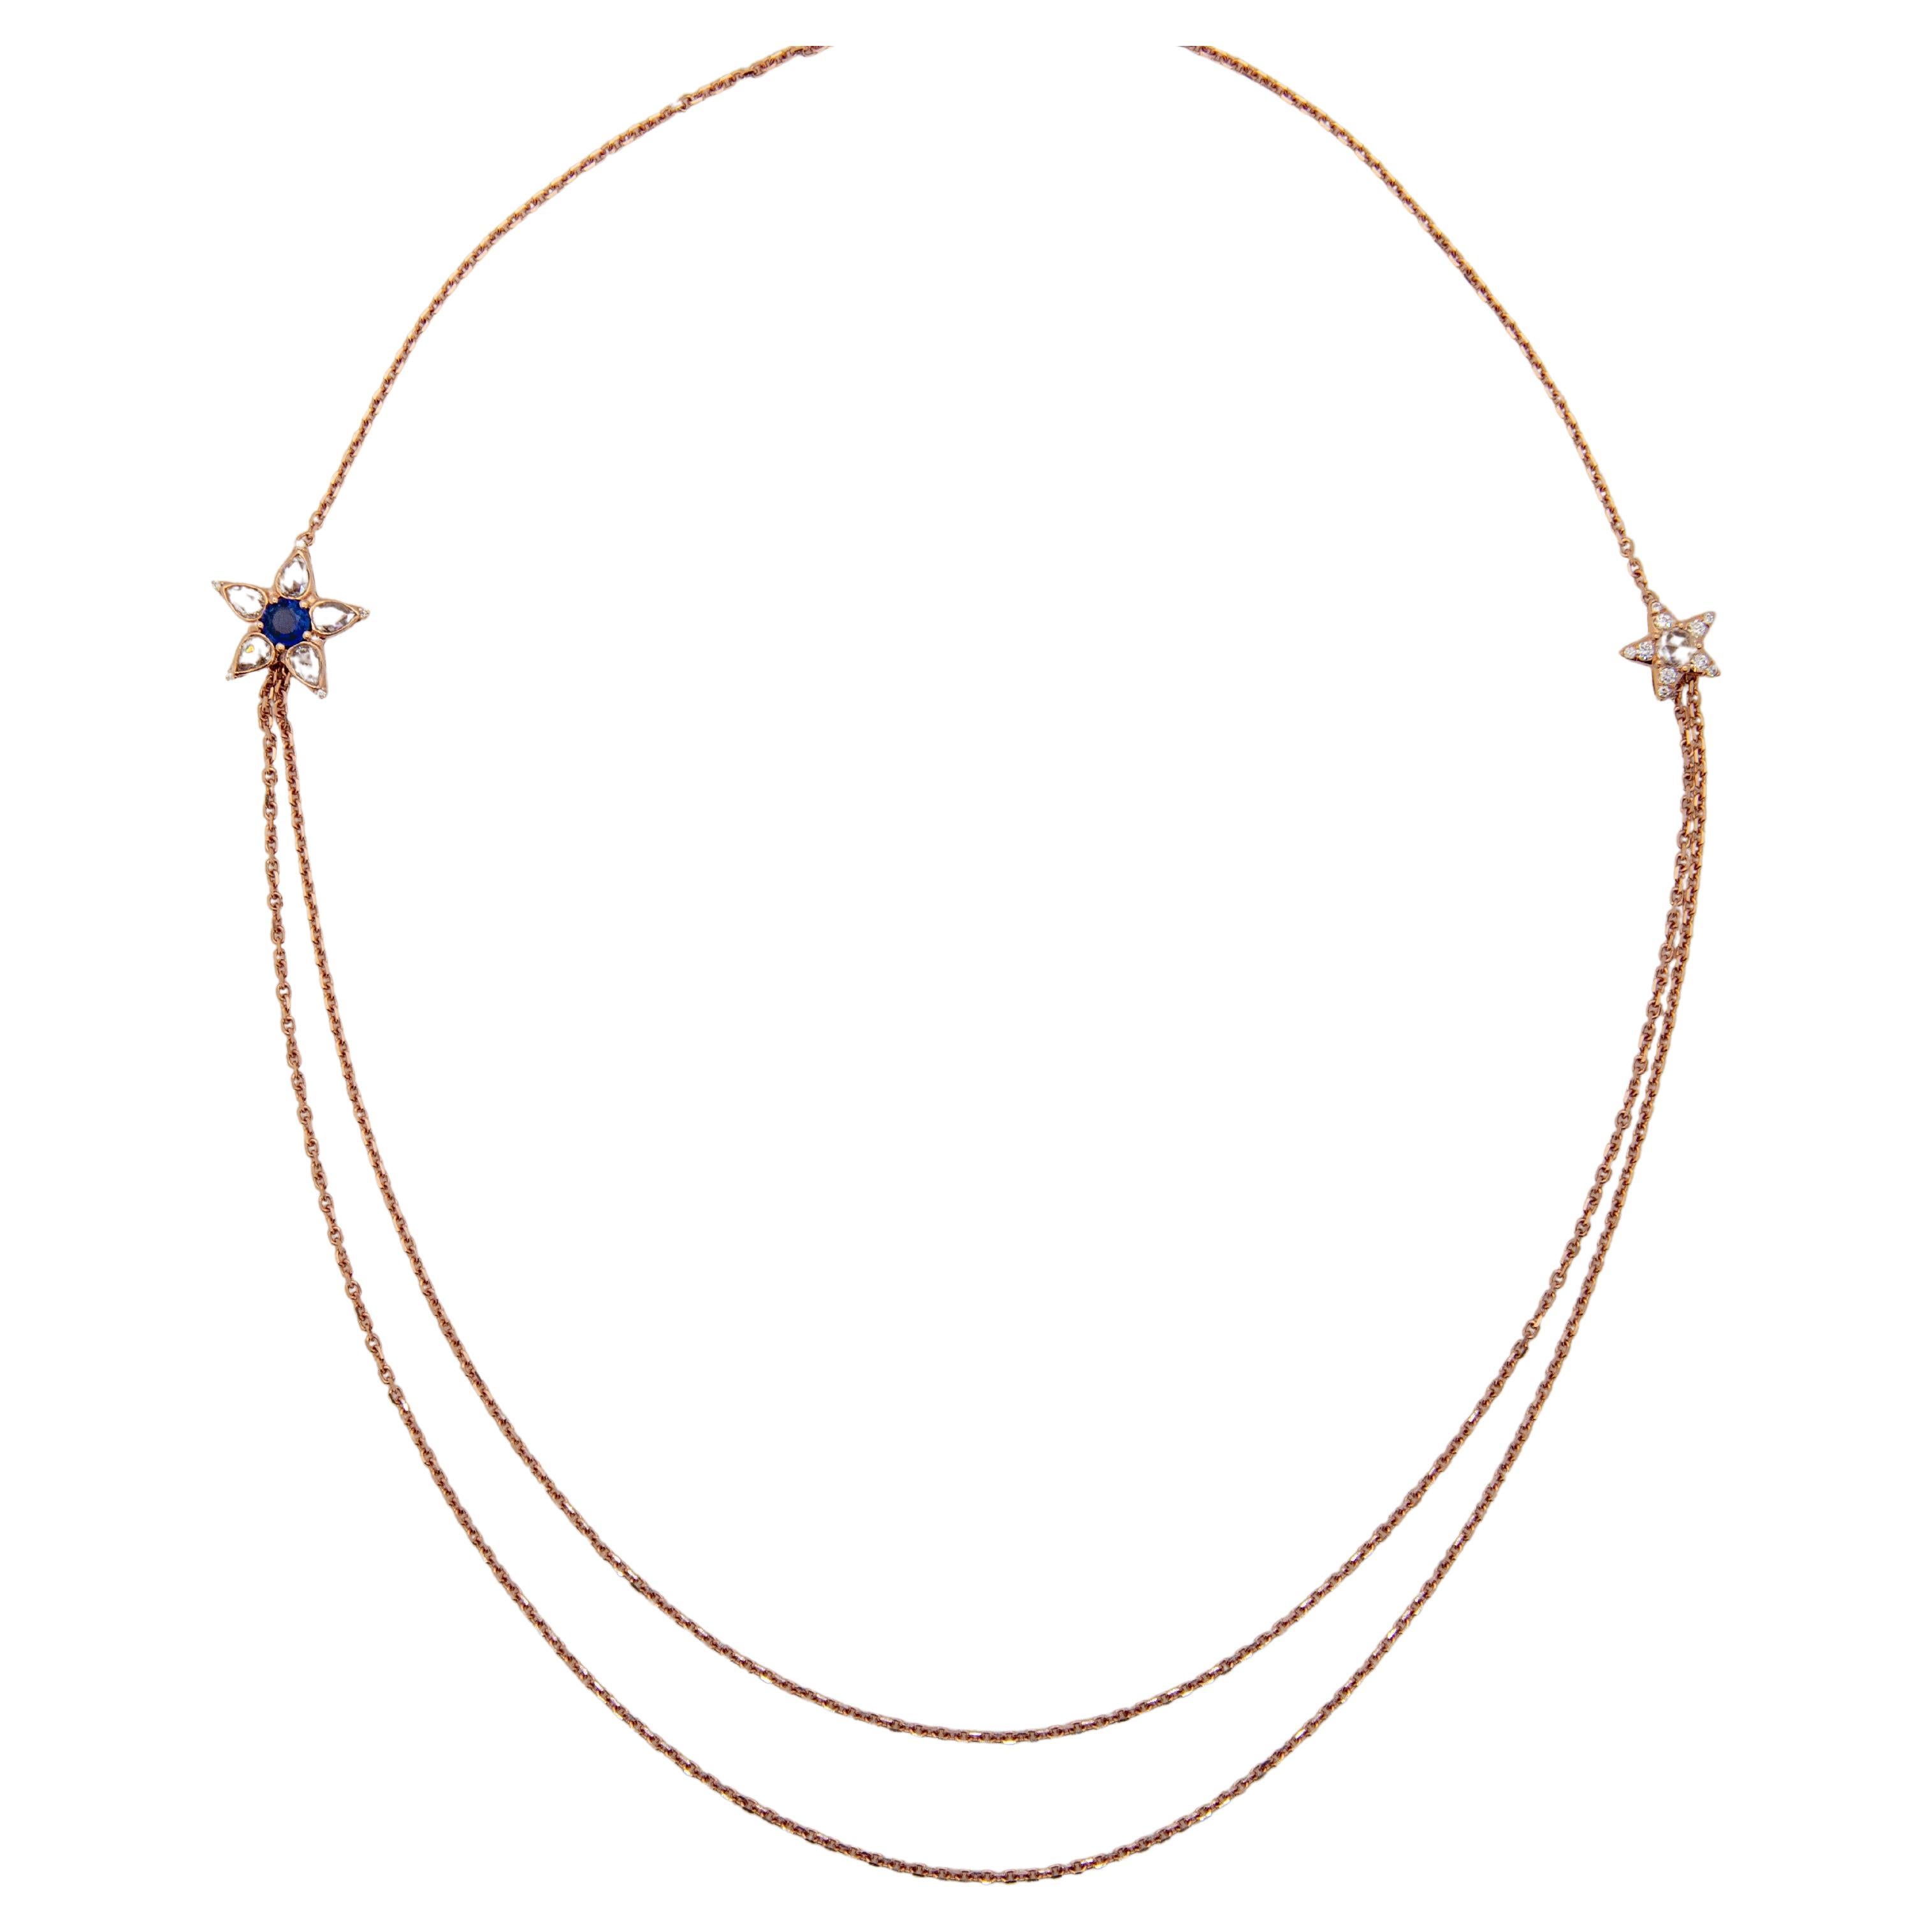 Beautiful 18K Rose Gold Necklace with two stars and double chain from under the stars. 

Ceylon Sapphire 0.37ct. 
Rose Cut Diamonds 0.78ct total. 
Round Brilliant Diamonds 0.15ct total.

3 length settings. Shortest setting 56cm, longest setting